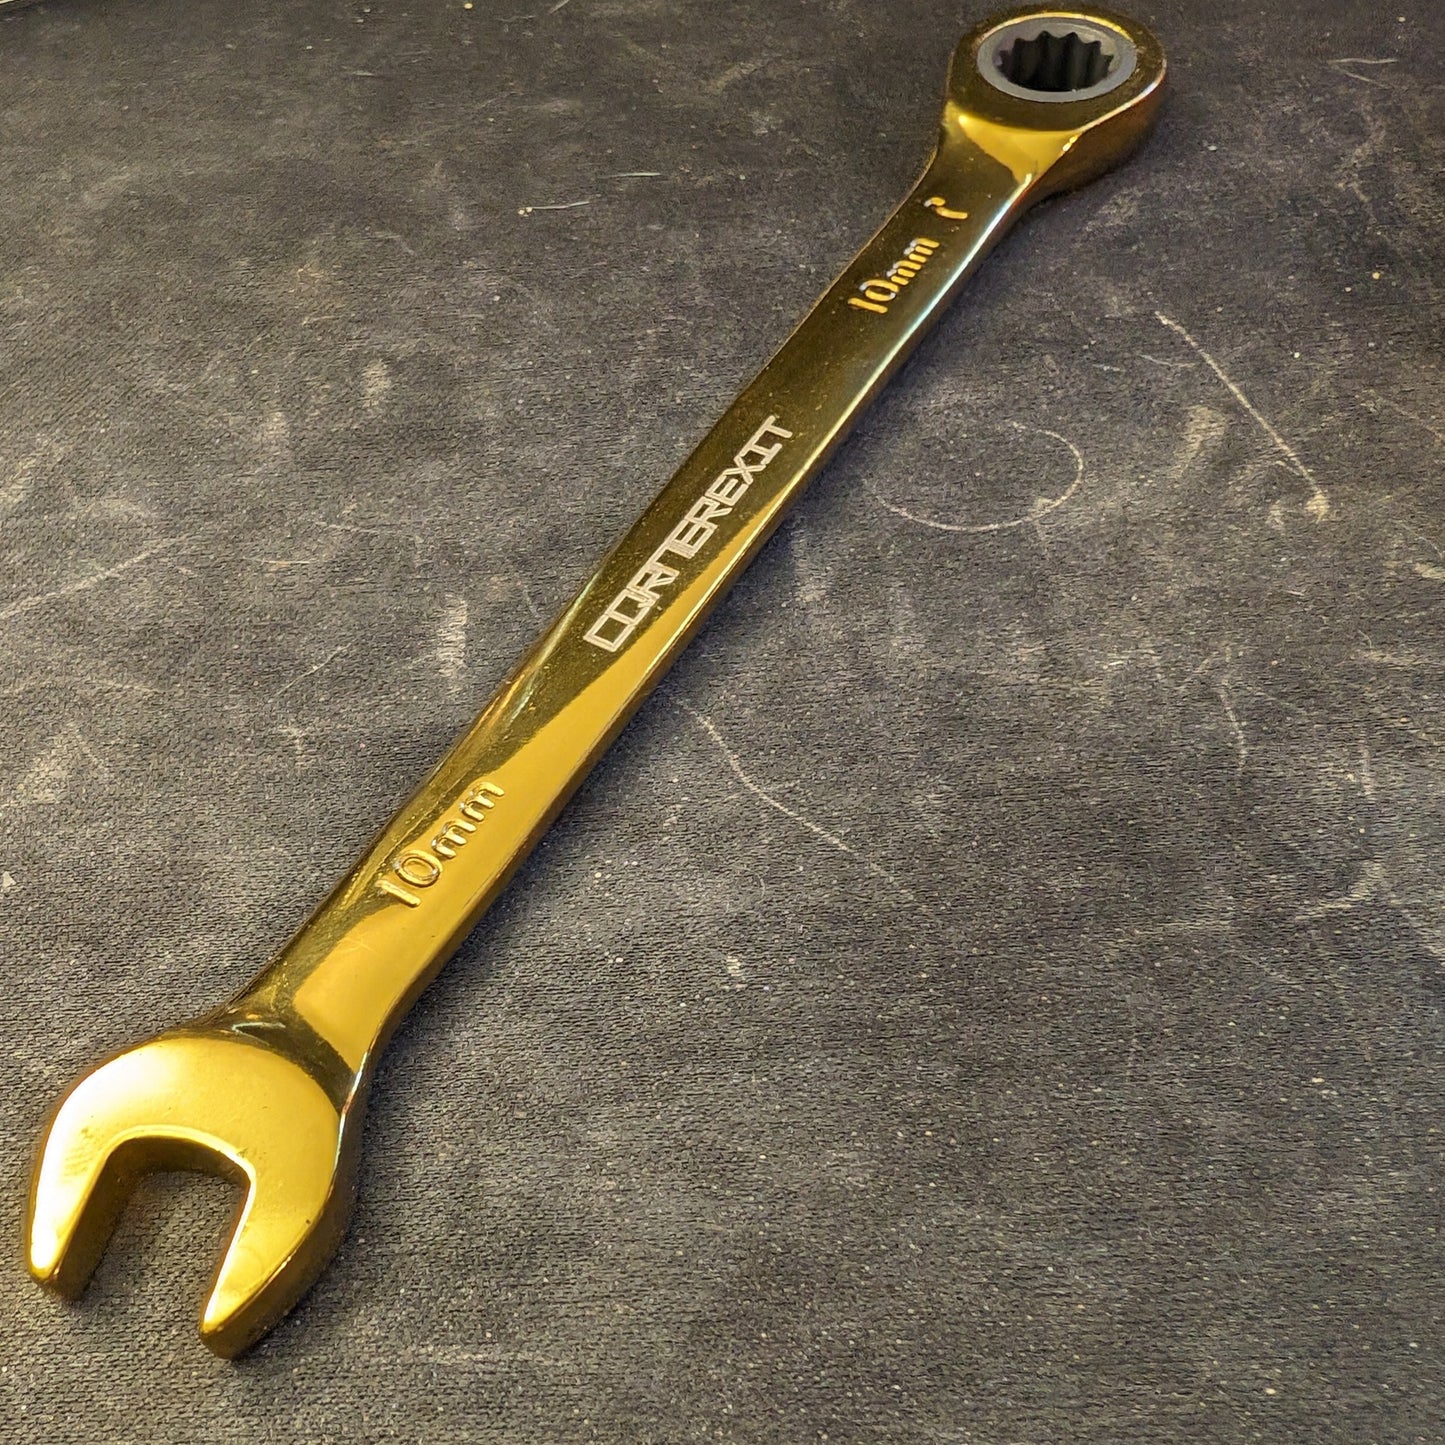 Golden 10mm Wrench